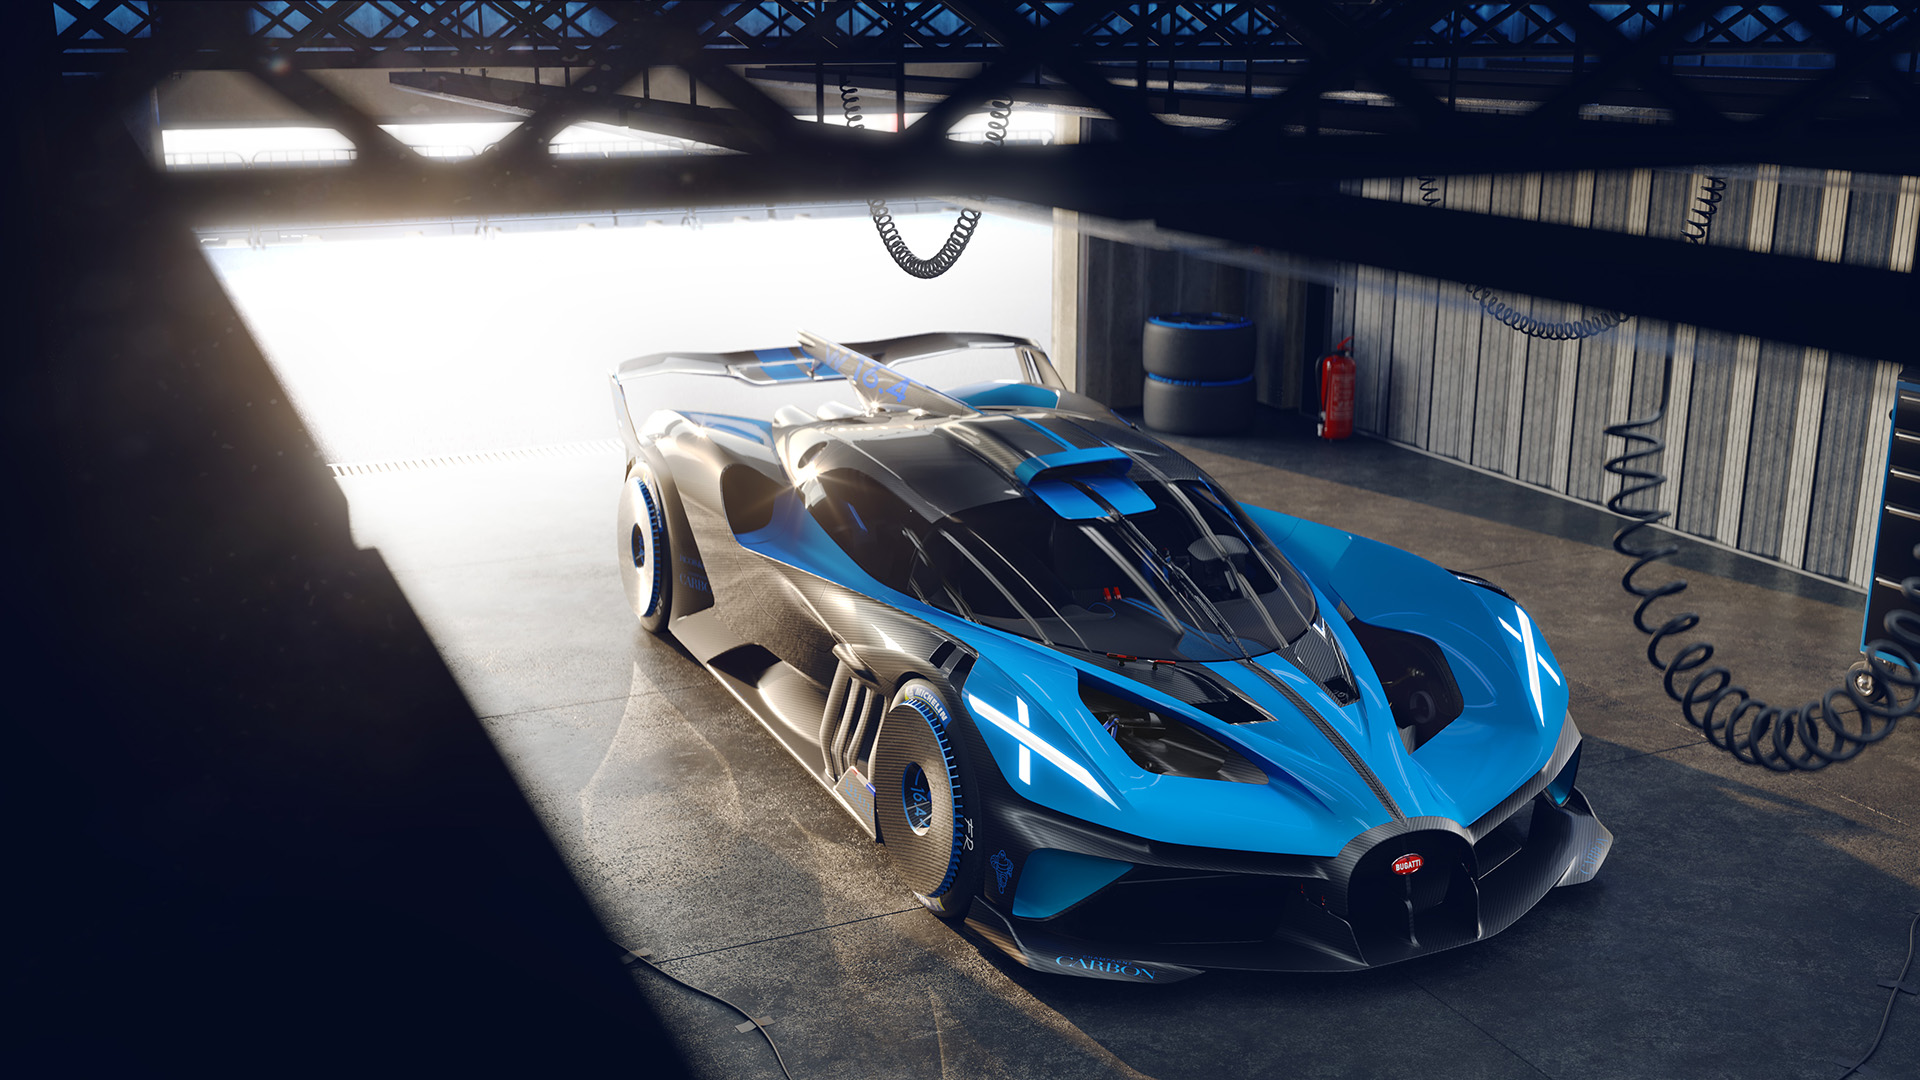 The Bugatti Bolide Is A Mind-Blowing 483 KM/H Track Monster